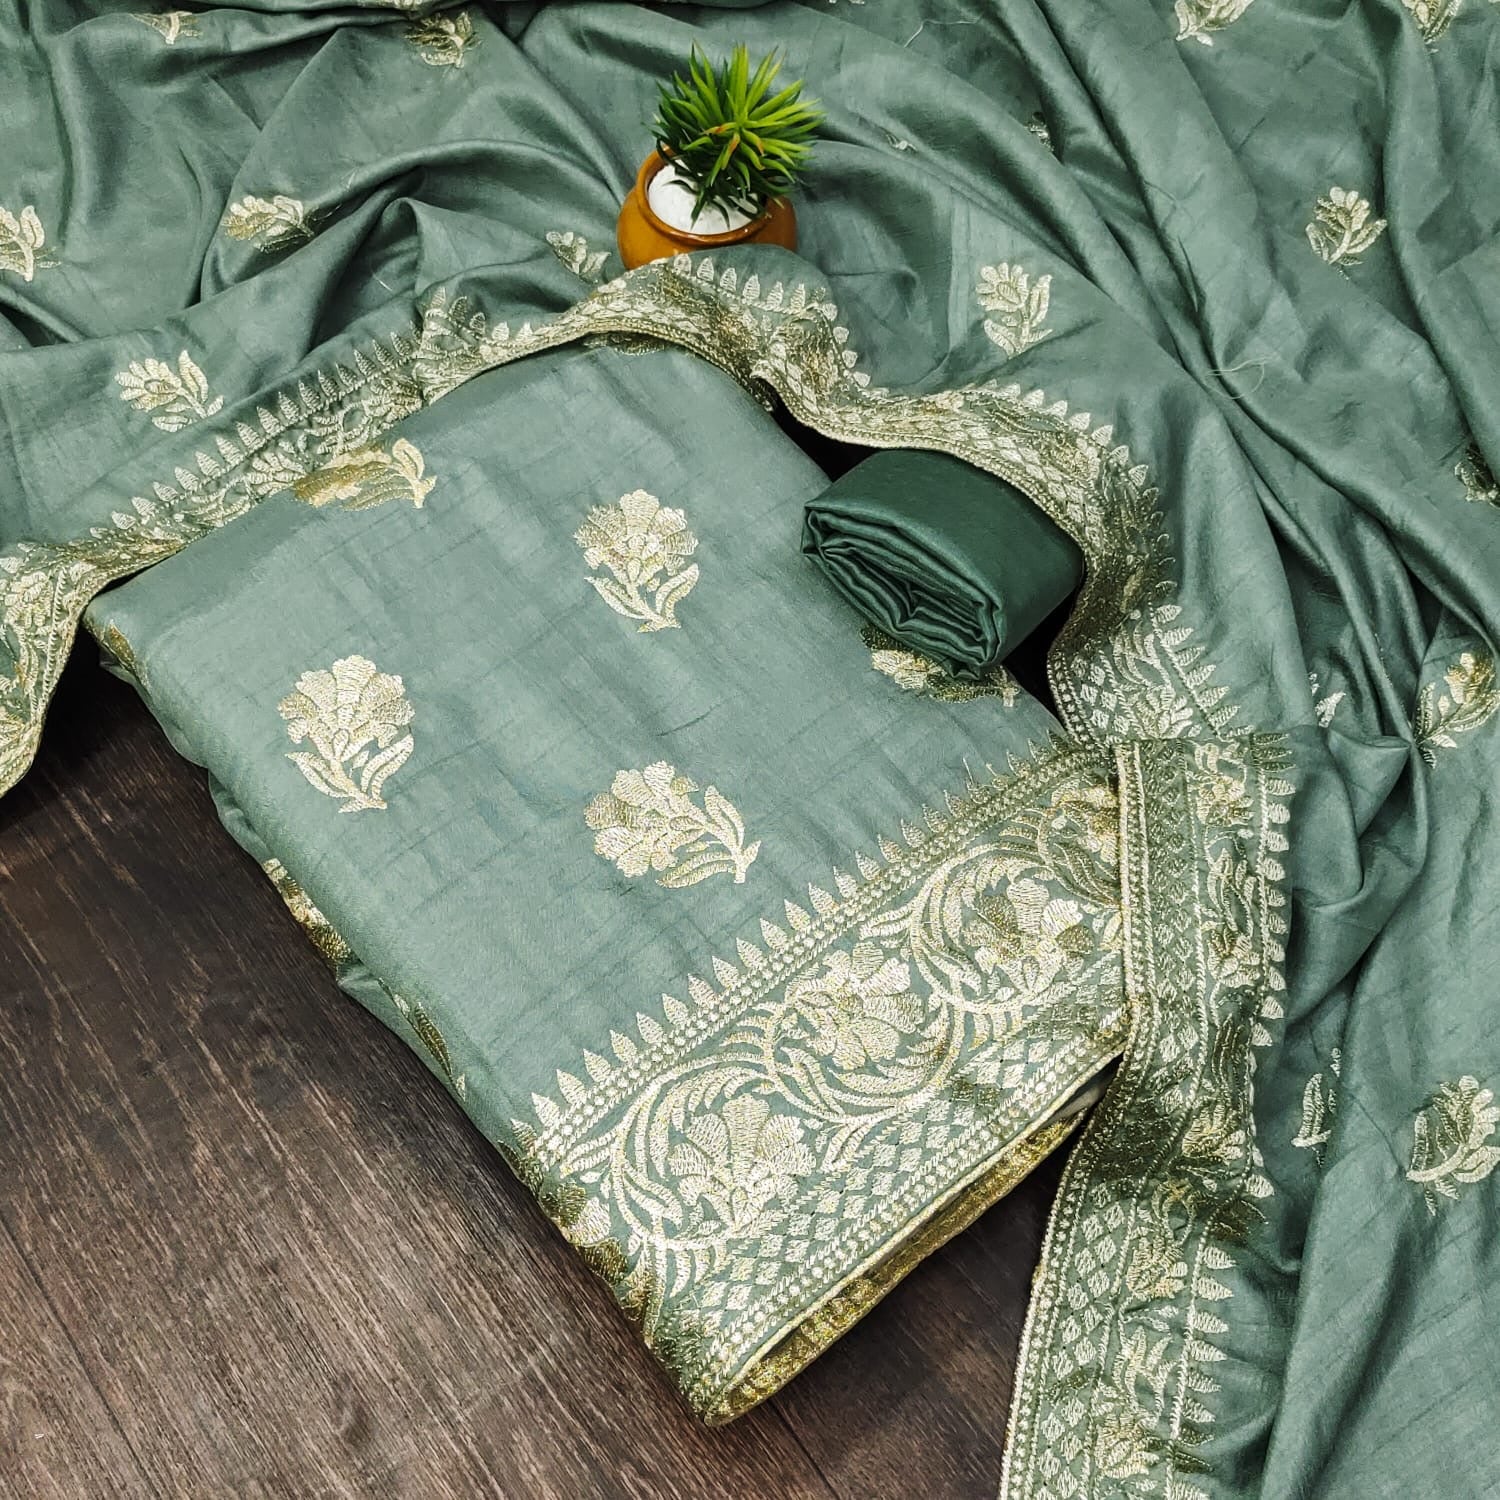 Vachitra Silk Fine Embroidery work Dress Material - Premium  from Ethenika.com  - Just INR 1690! Shop now at Ethenika.com 